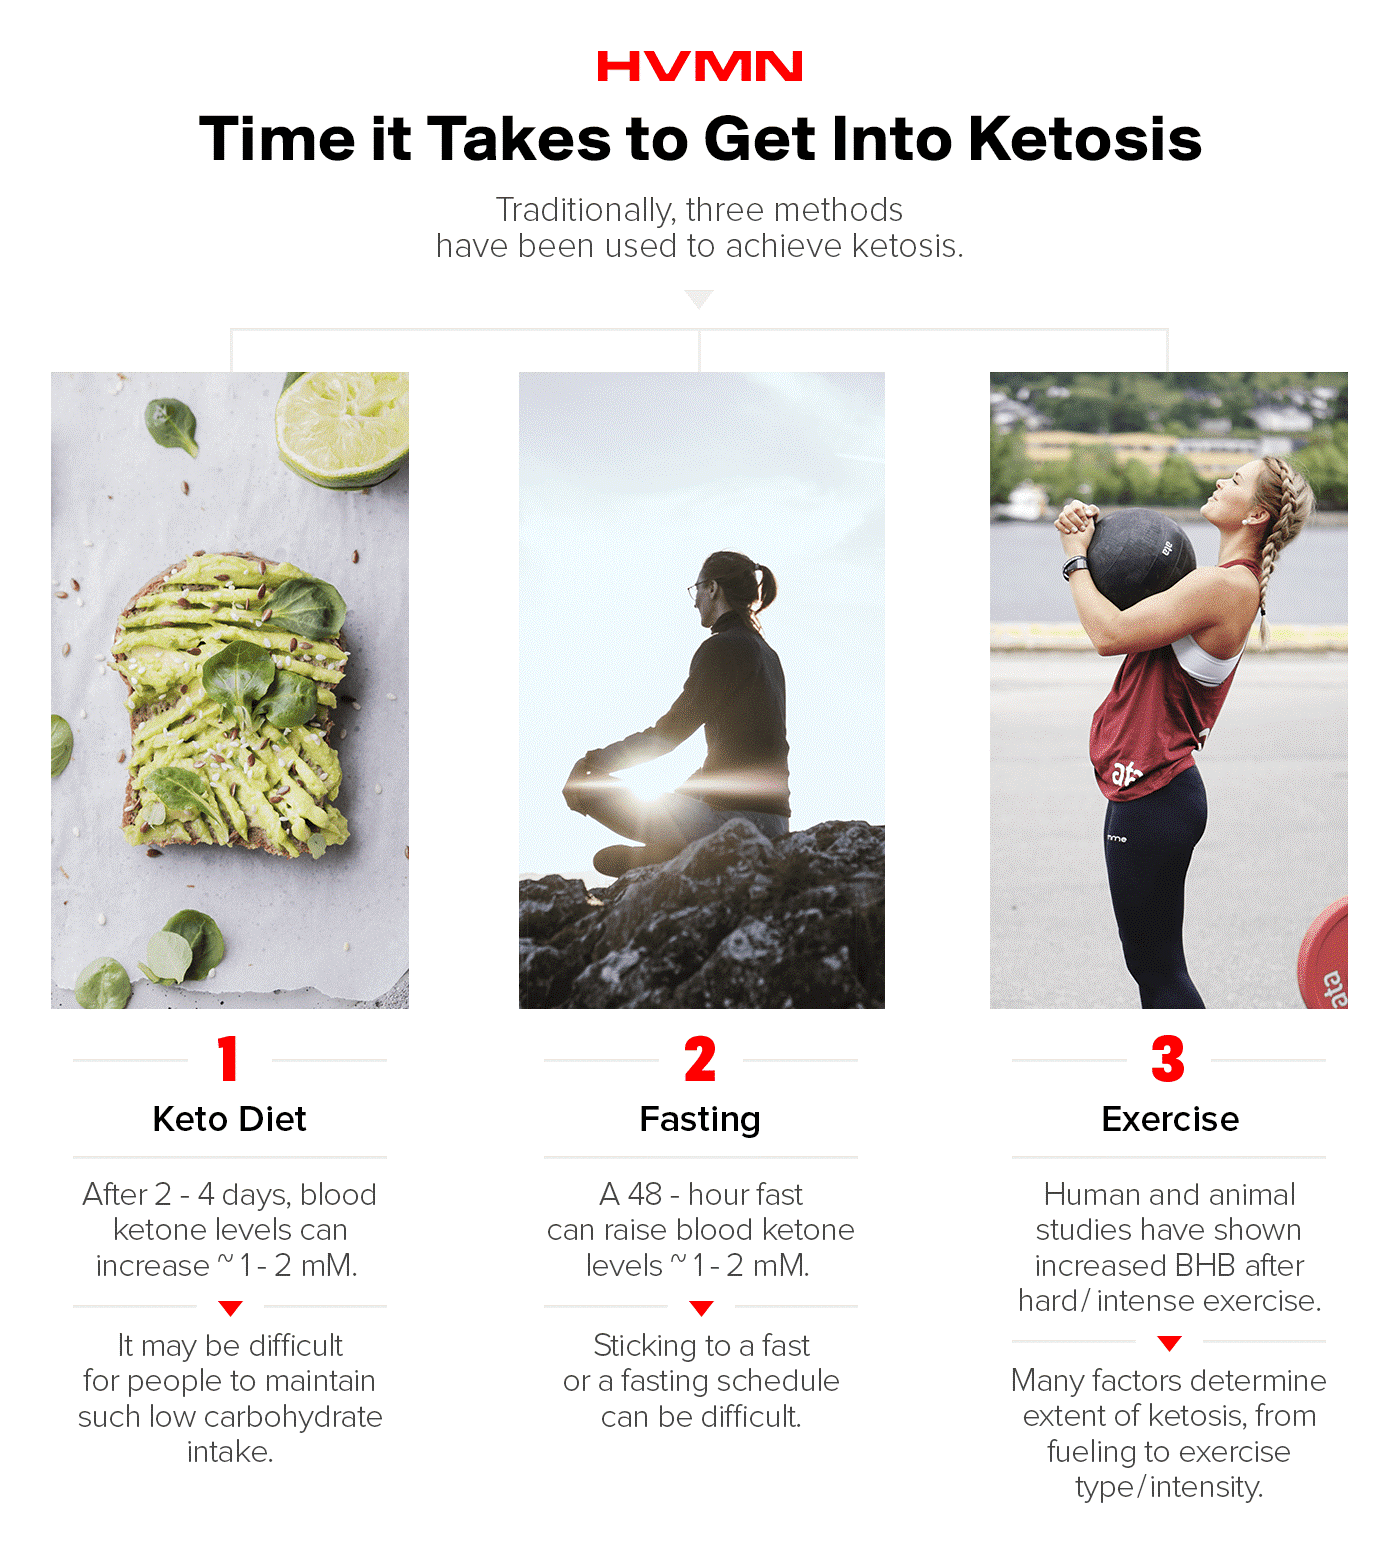 How Long Does it Take to Get Into Ketosis and Keto-Adapt? — FIRE TEAM